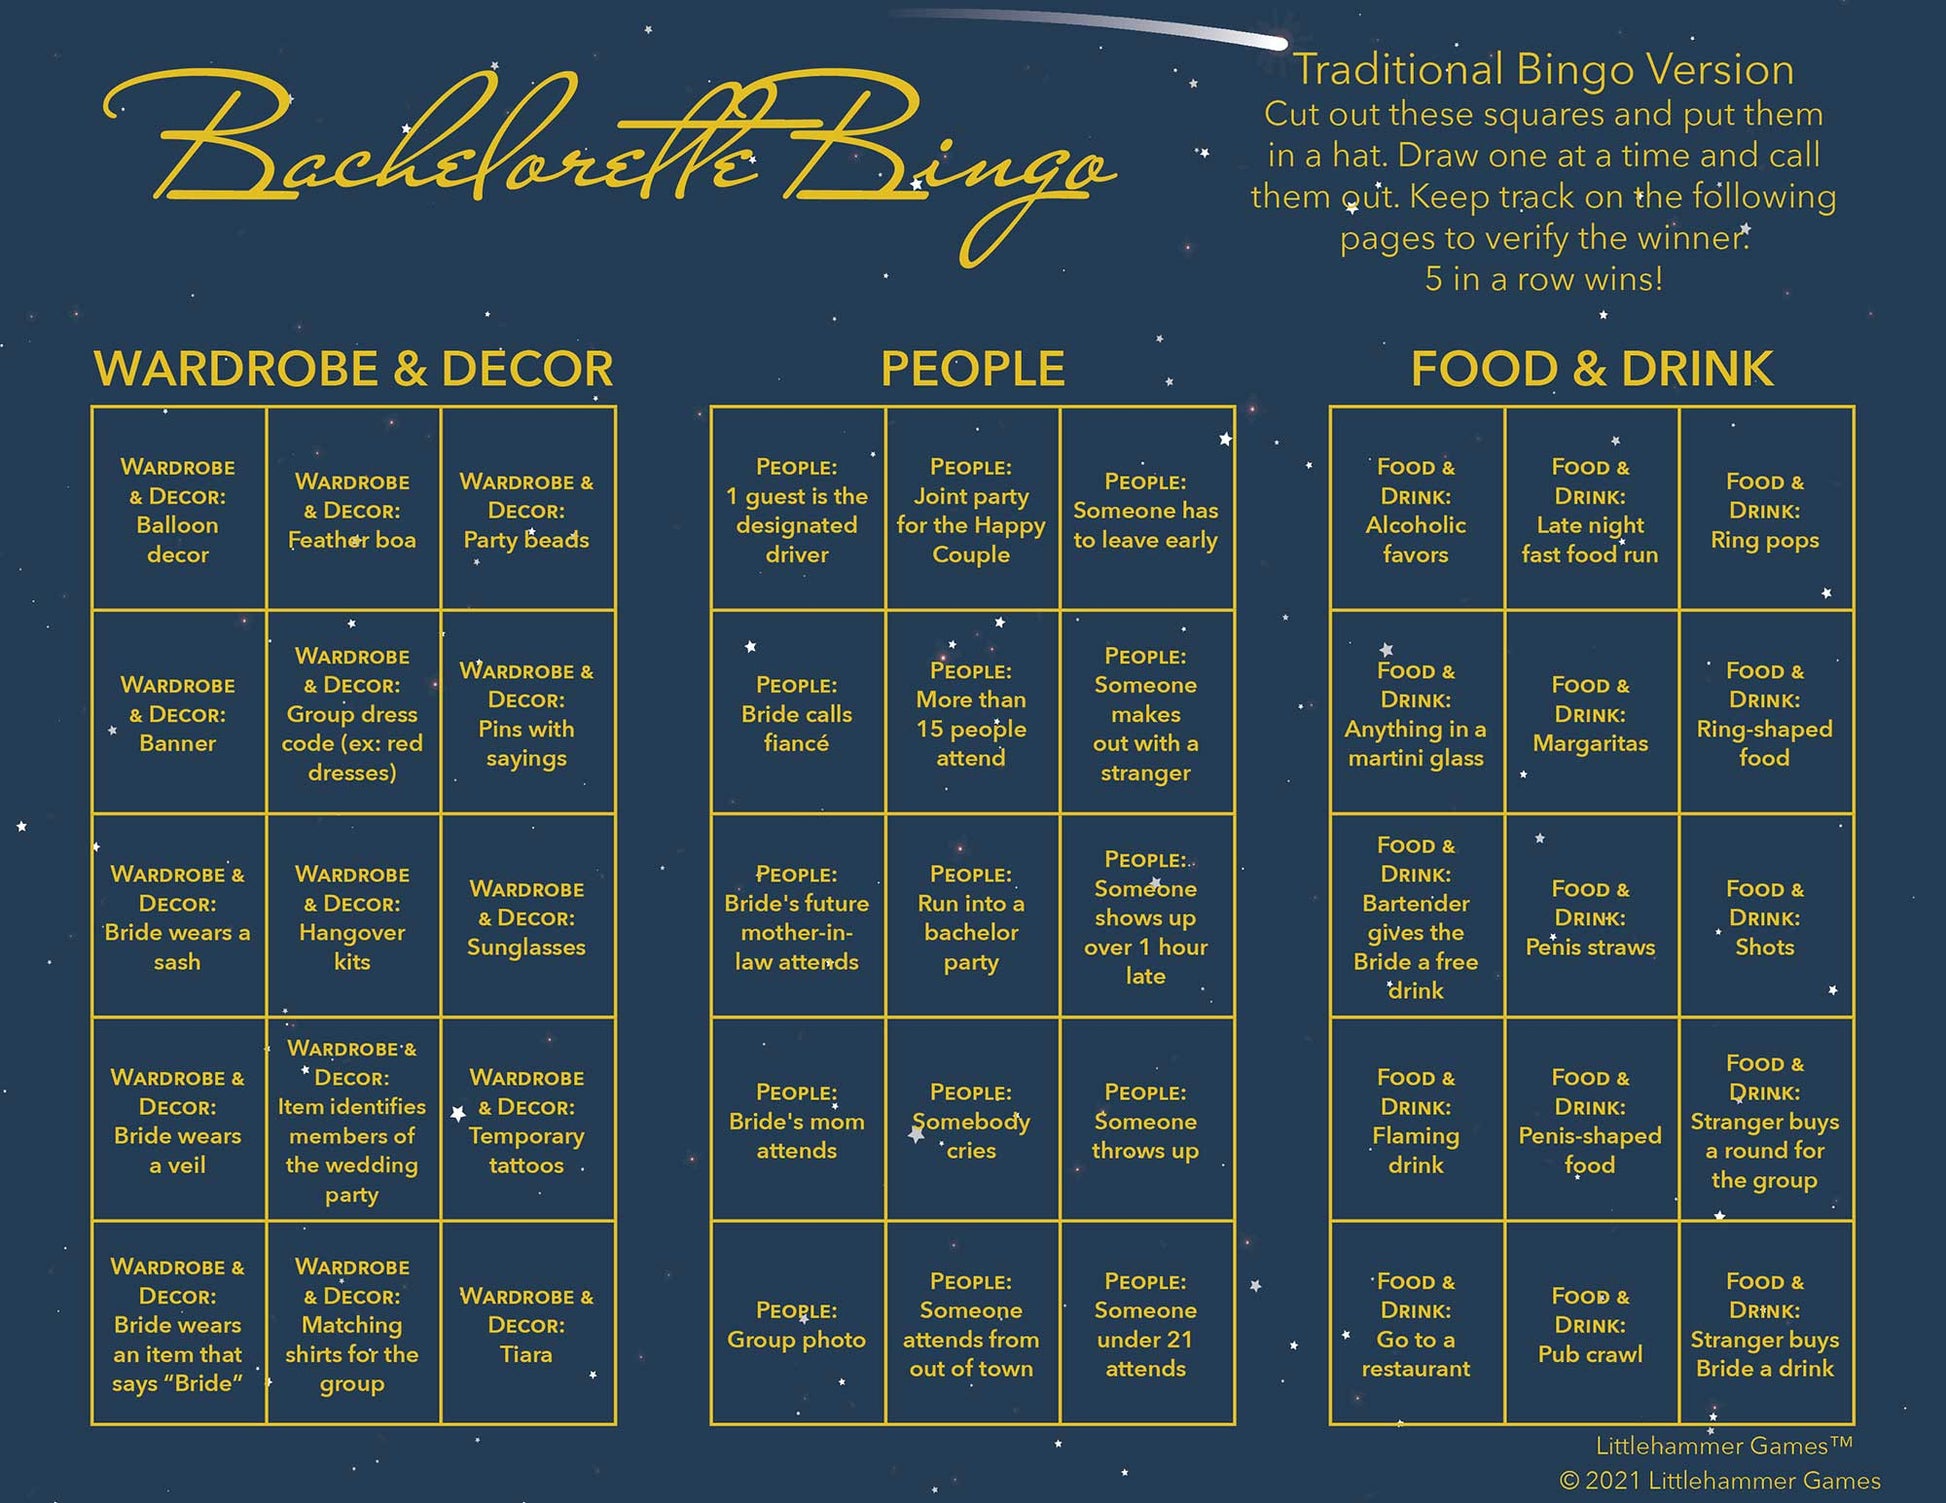 Bachelorette Bingo calling card with gold text on a celestial background